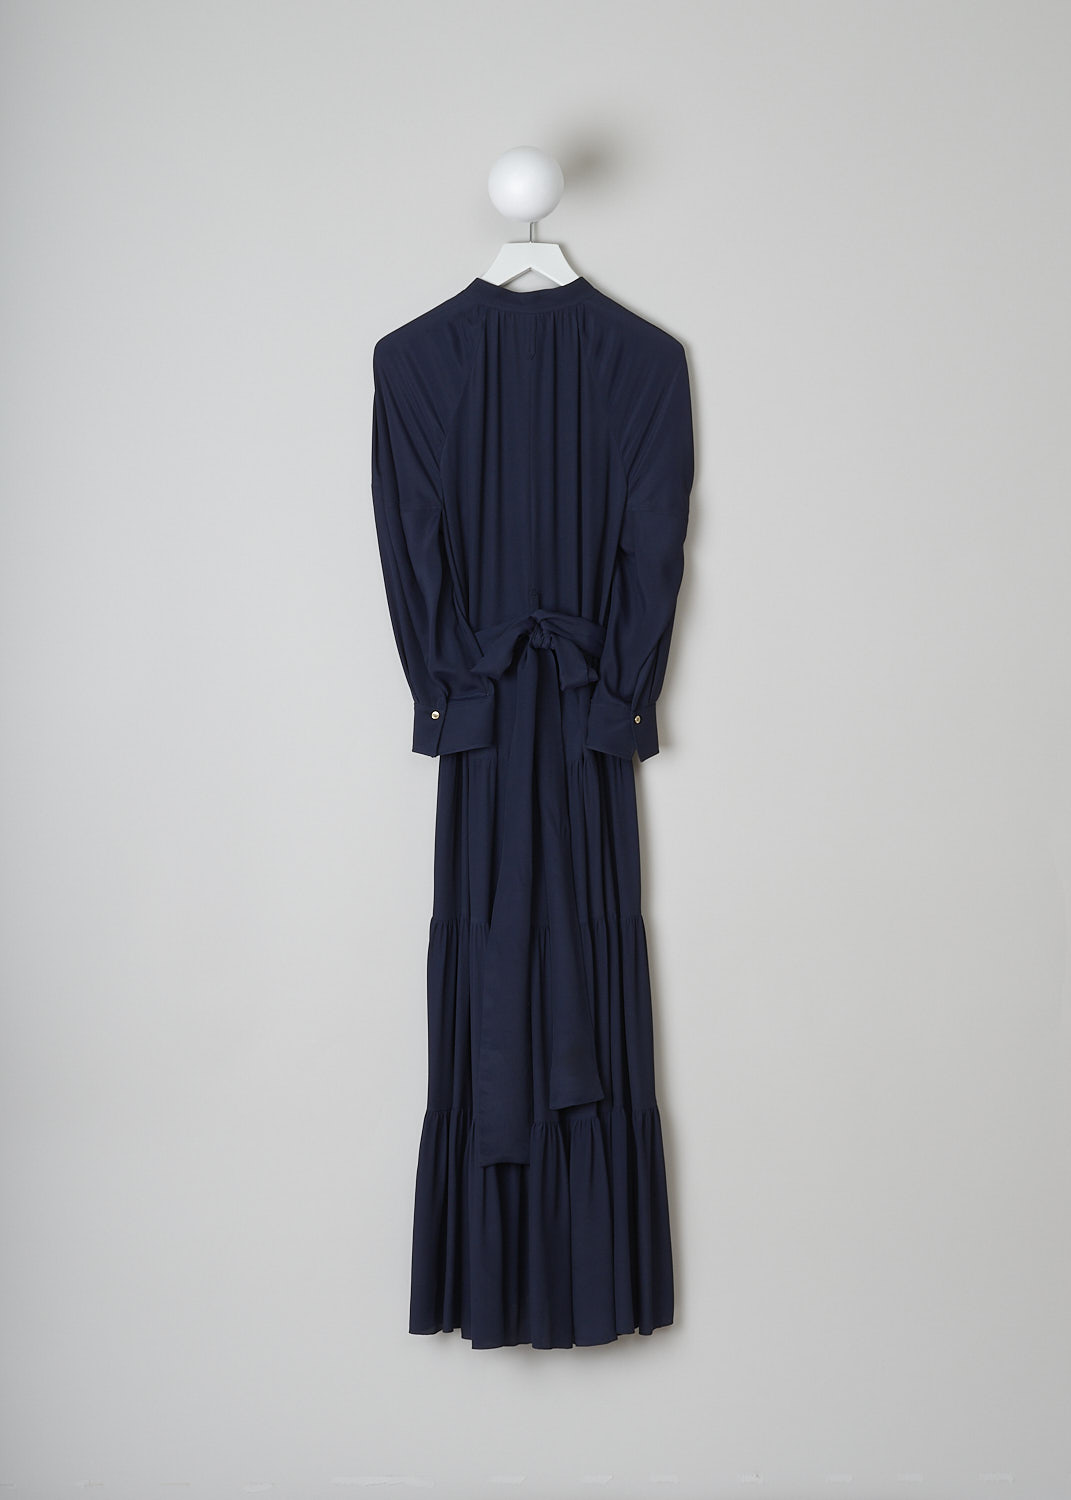 CHLOÃ‰, INK NAVY GATHERED CREPE MAXI DRESS, CHC21SRO020324C3_INK_NAVY,  Blue, Back, This Inky Navy dress has a mandarin collar with a front button placket with gold-tone buttons that reaches halfway down the pleated bodice. The long balloon sleeves have buttoned cuffs with those same gold-tone buttons. A matching detachable fabric belt can be used to cinch in the waist. The dress has a tiered maxi skirt with two side slanted pockets.
